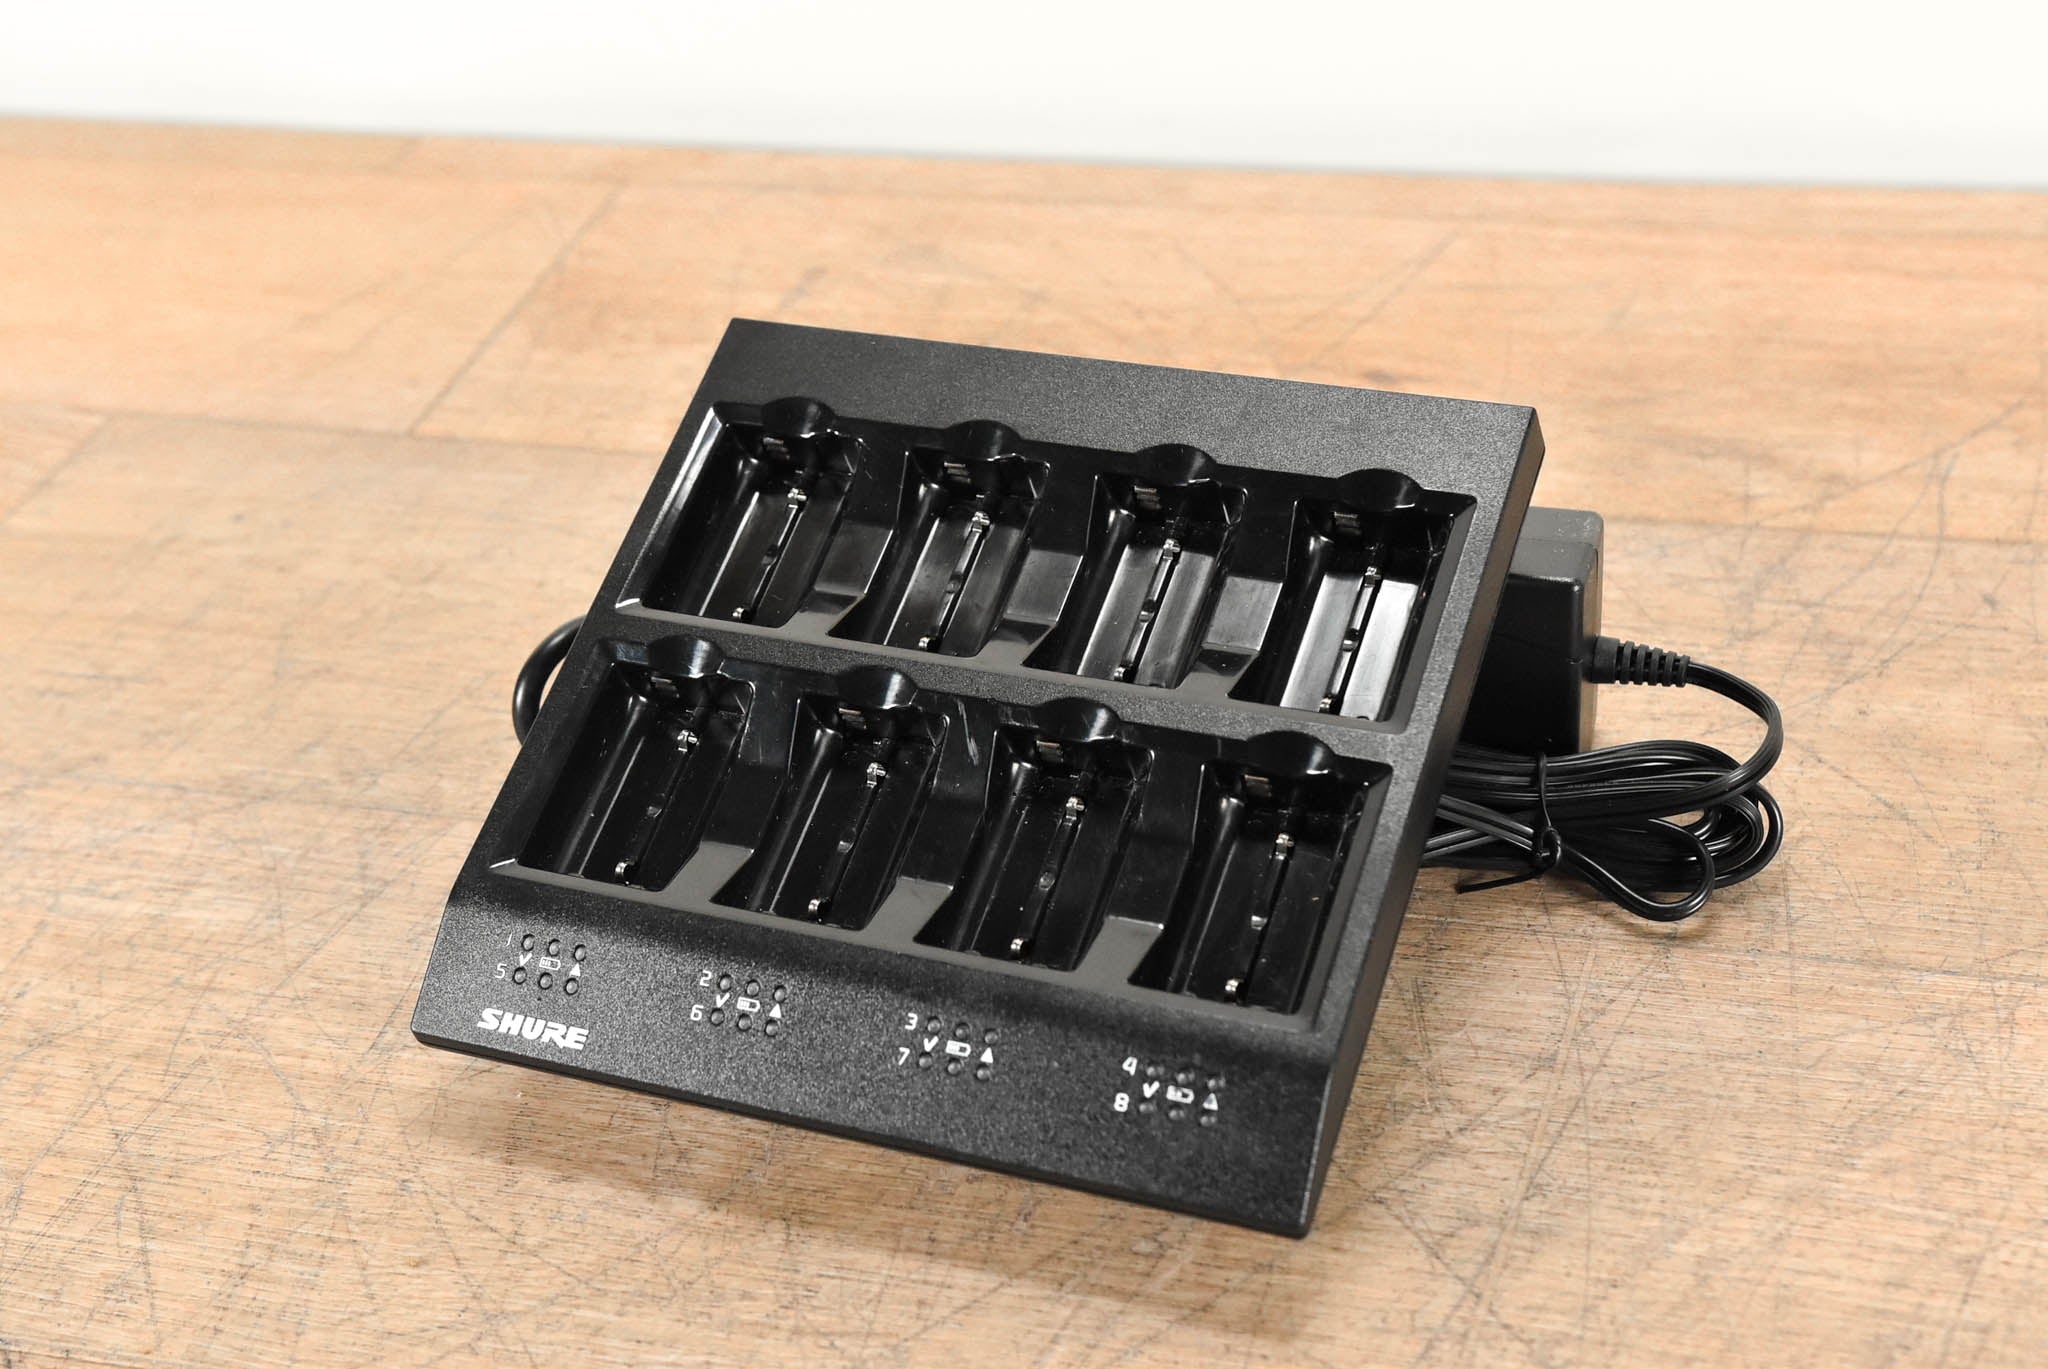 Shure SBC800 Eight-Bay Battery Charger for SB900B Batteries